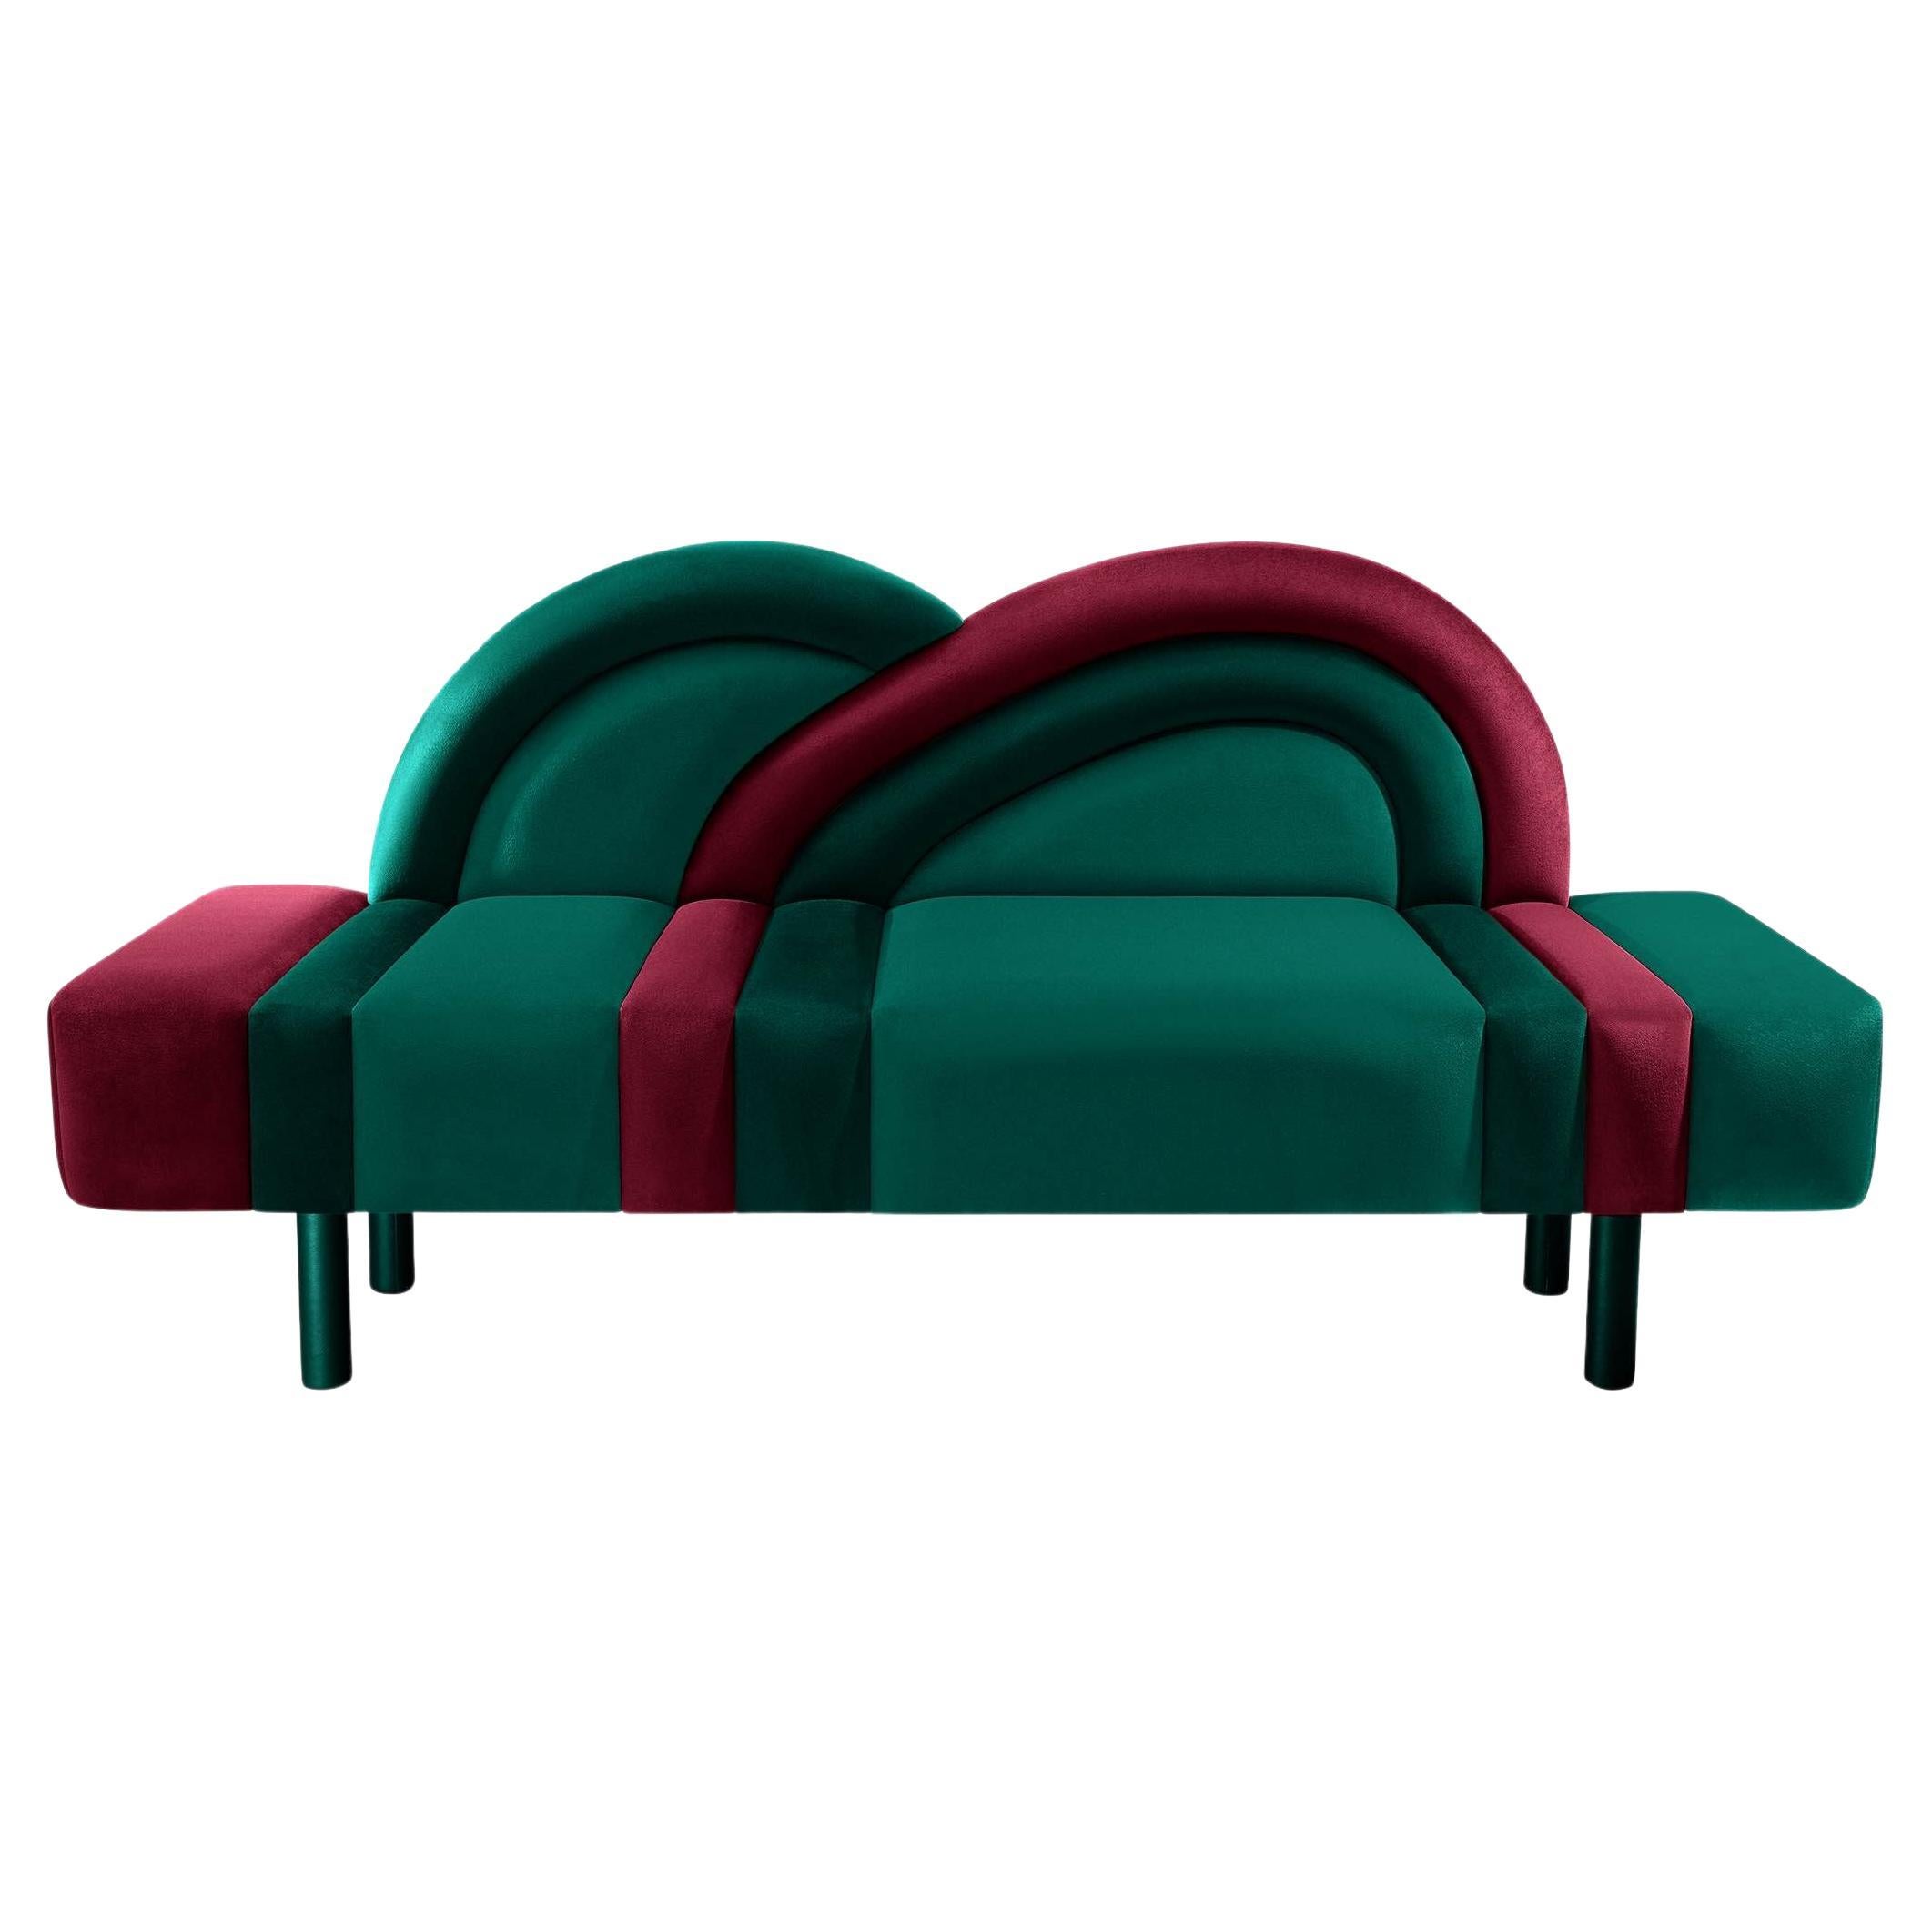 Sunset Contemporary and Customizable Sofa by Luísa Peixoto  For Sale